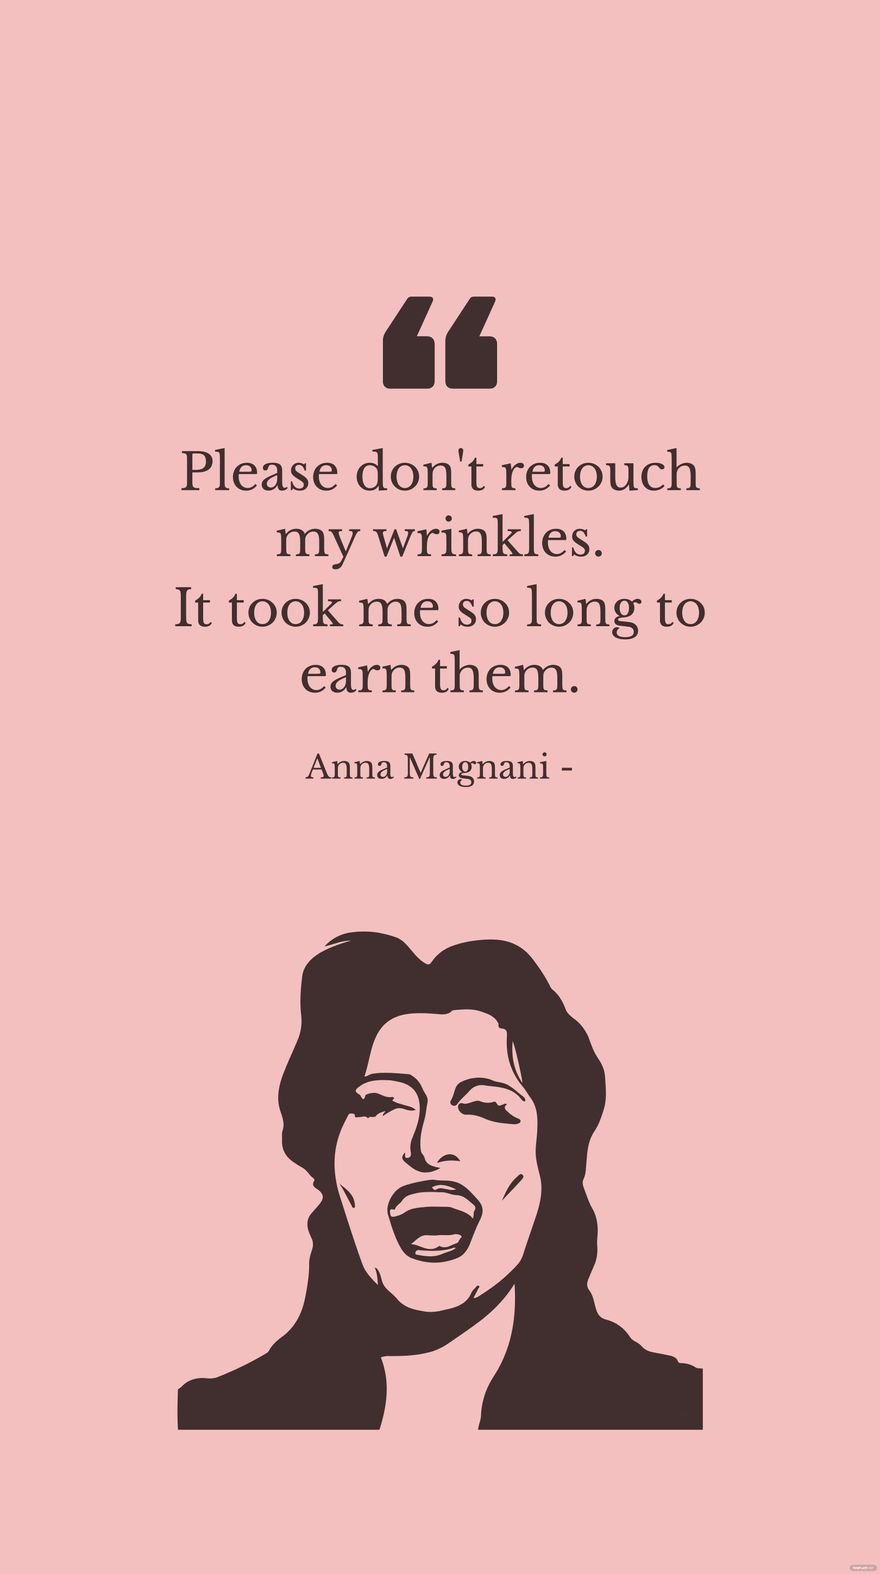 Anna Magnani - Please don't retouch my wrinkles. It took me so long to earn them.